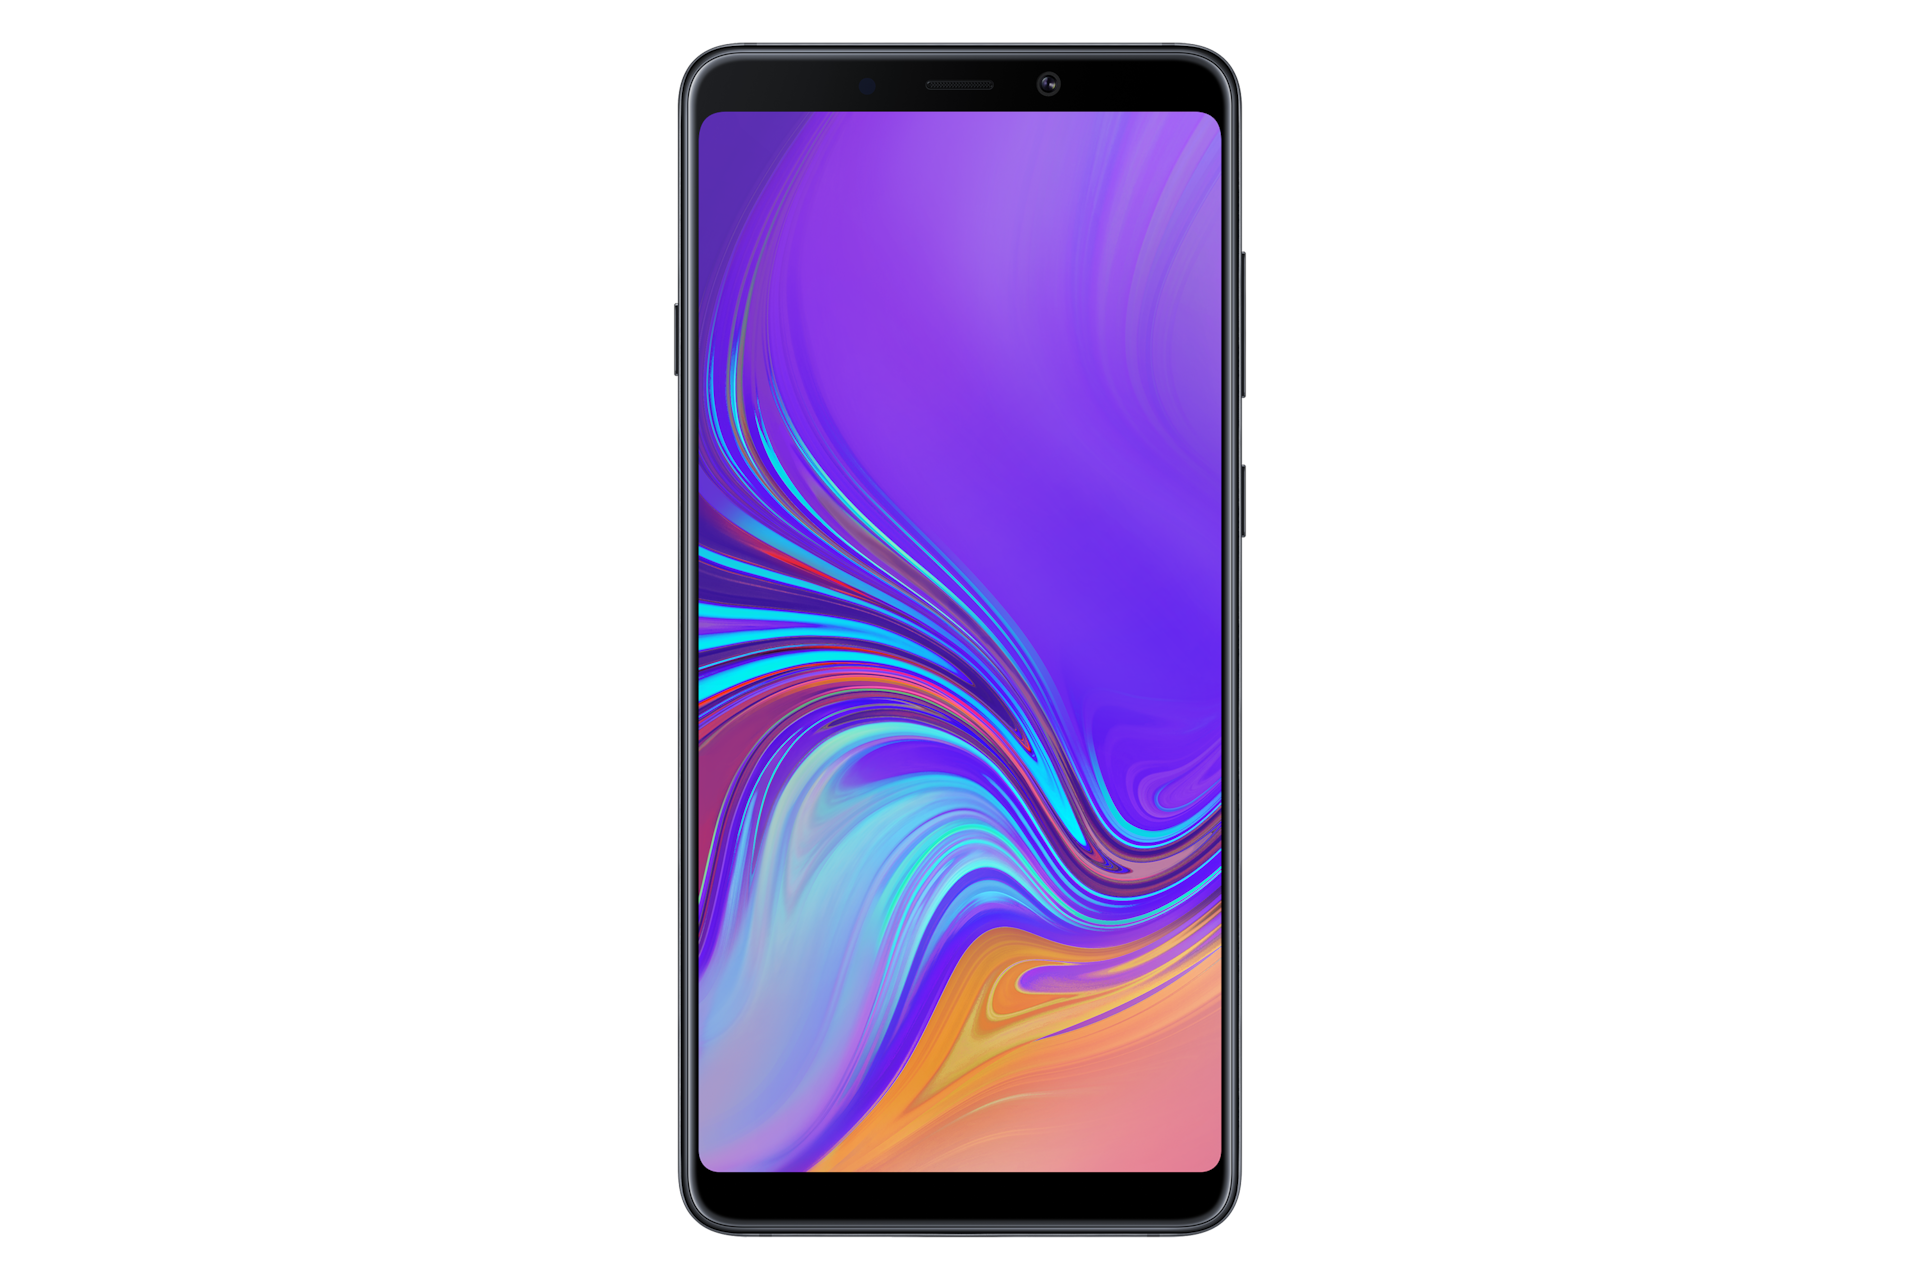 What are the new design features of Samsung Galaxy A9?